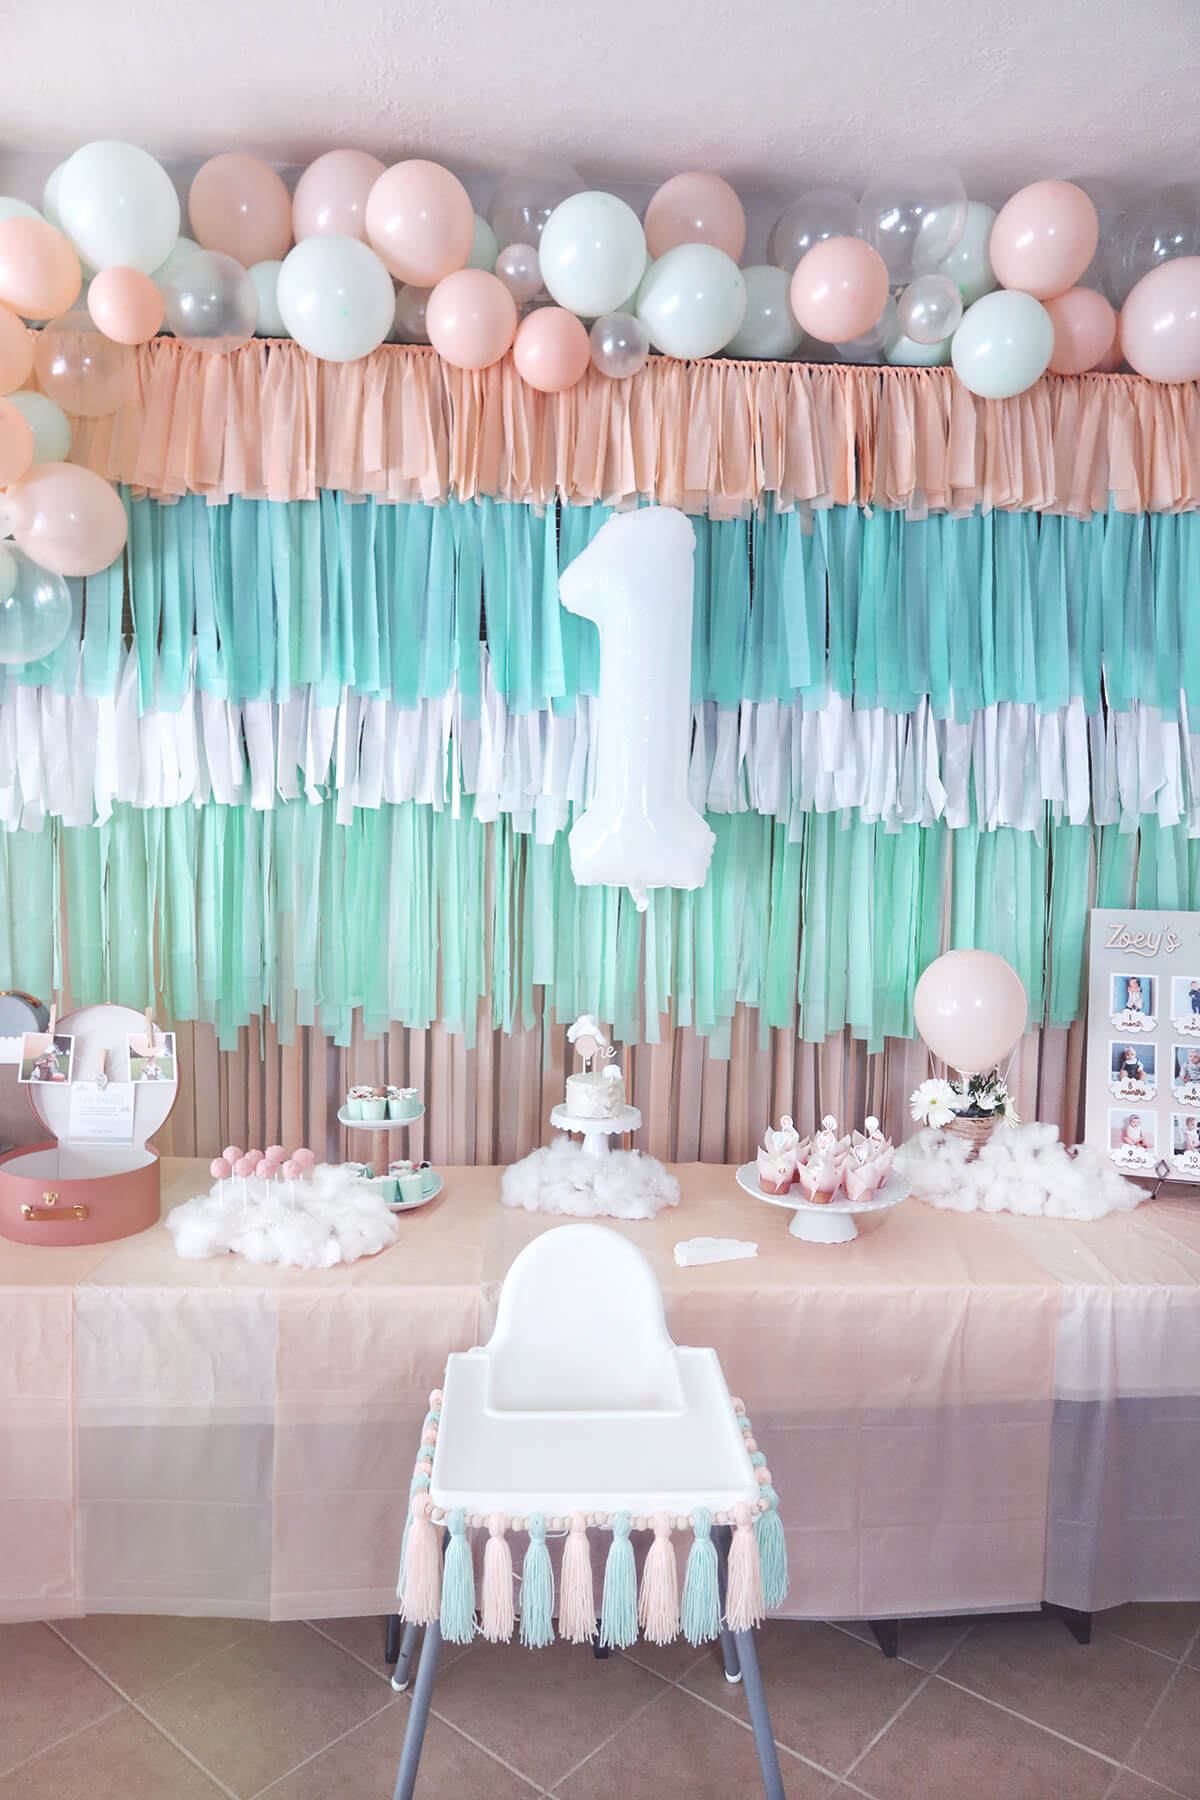 A cloud 1st Birthday Party